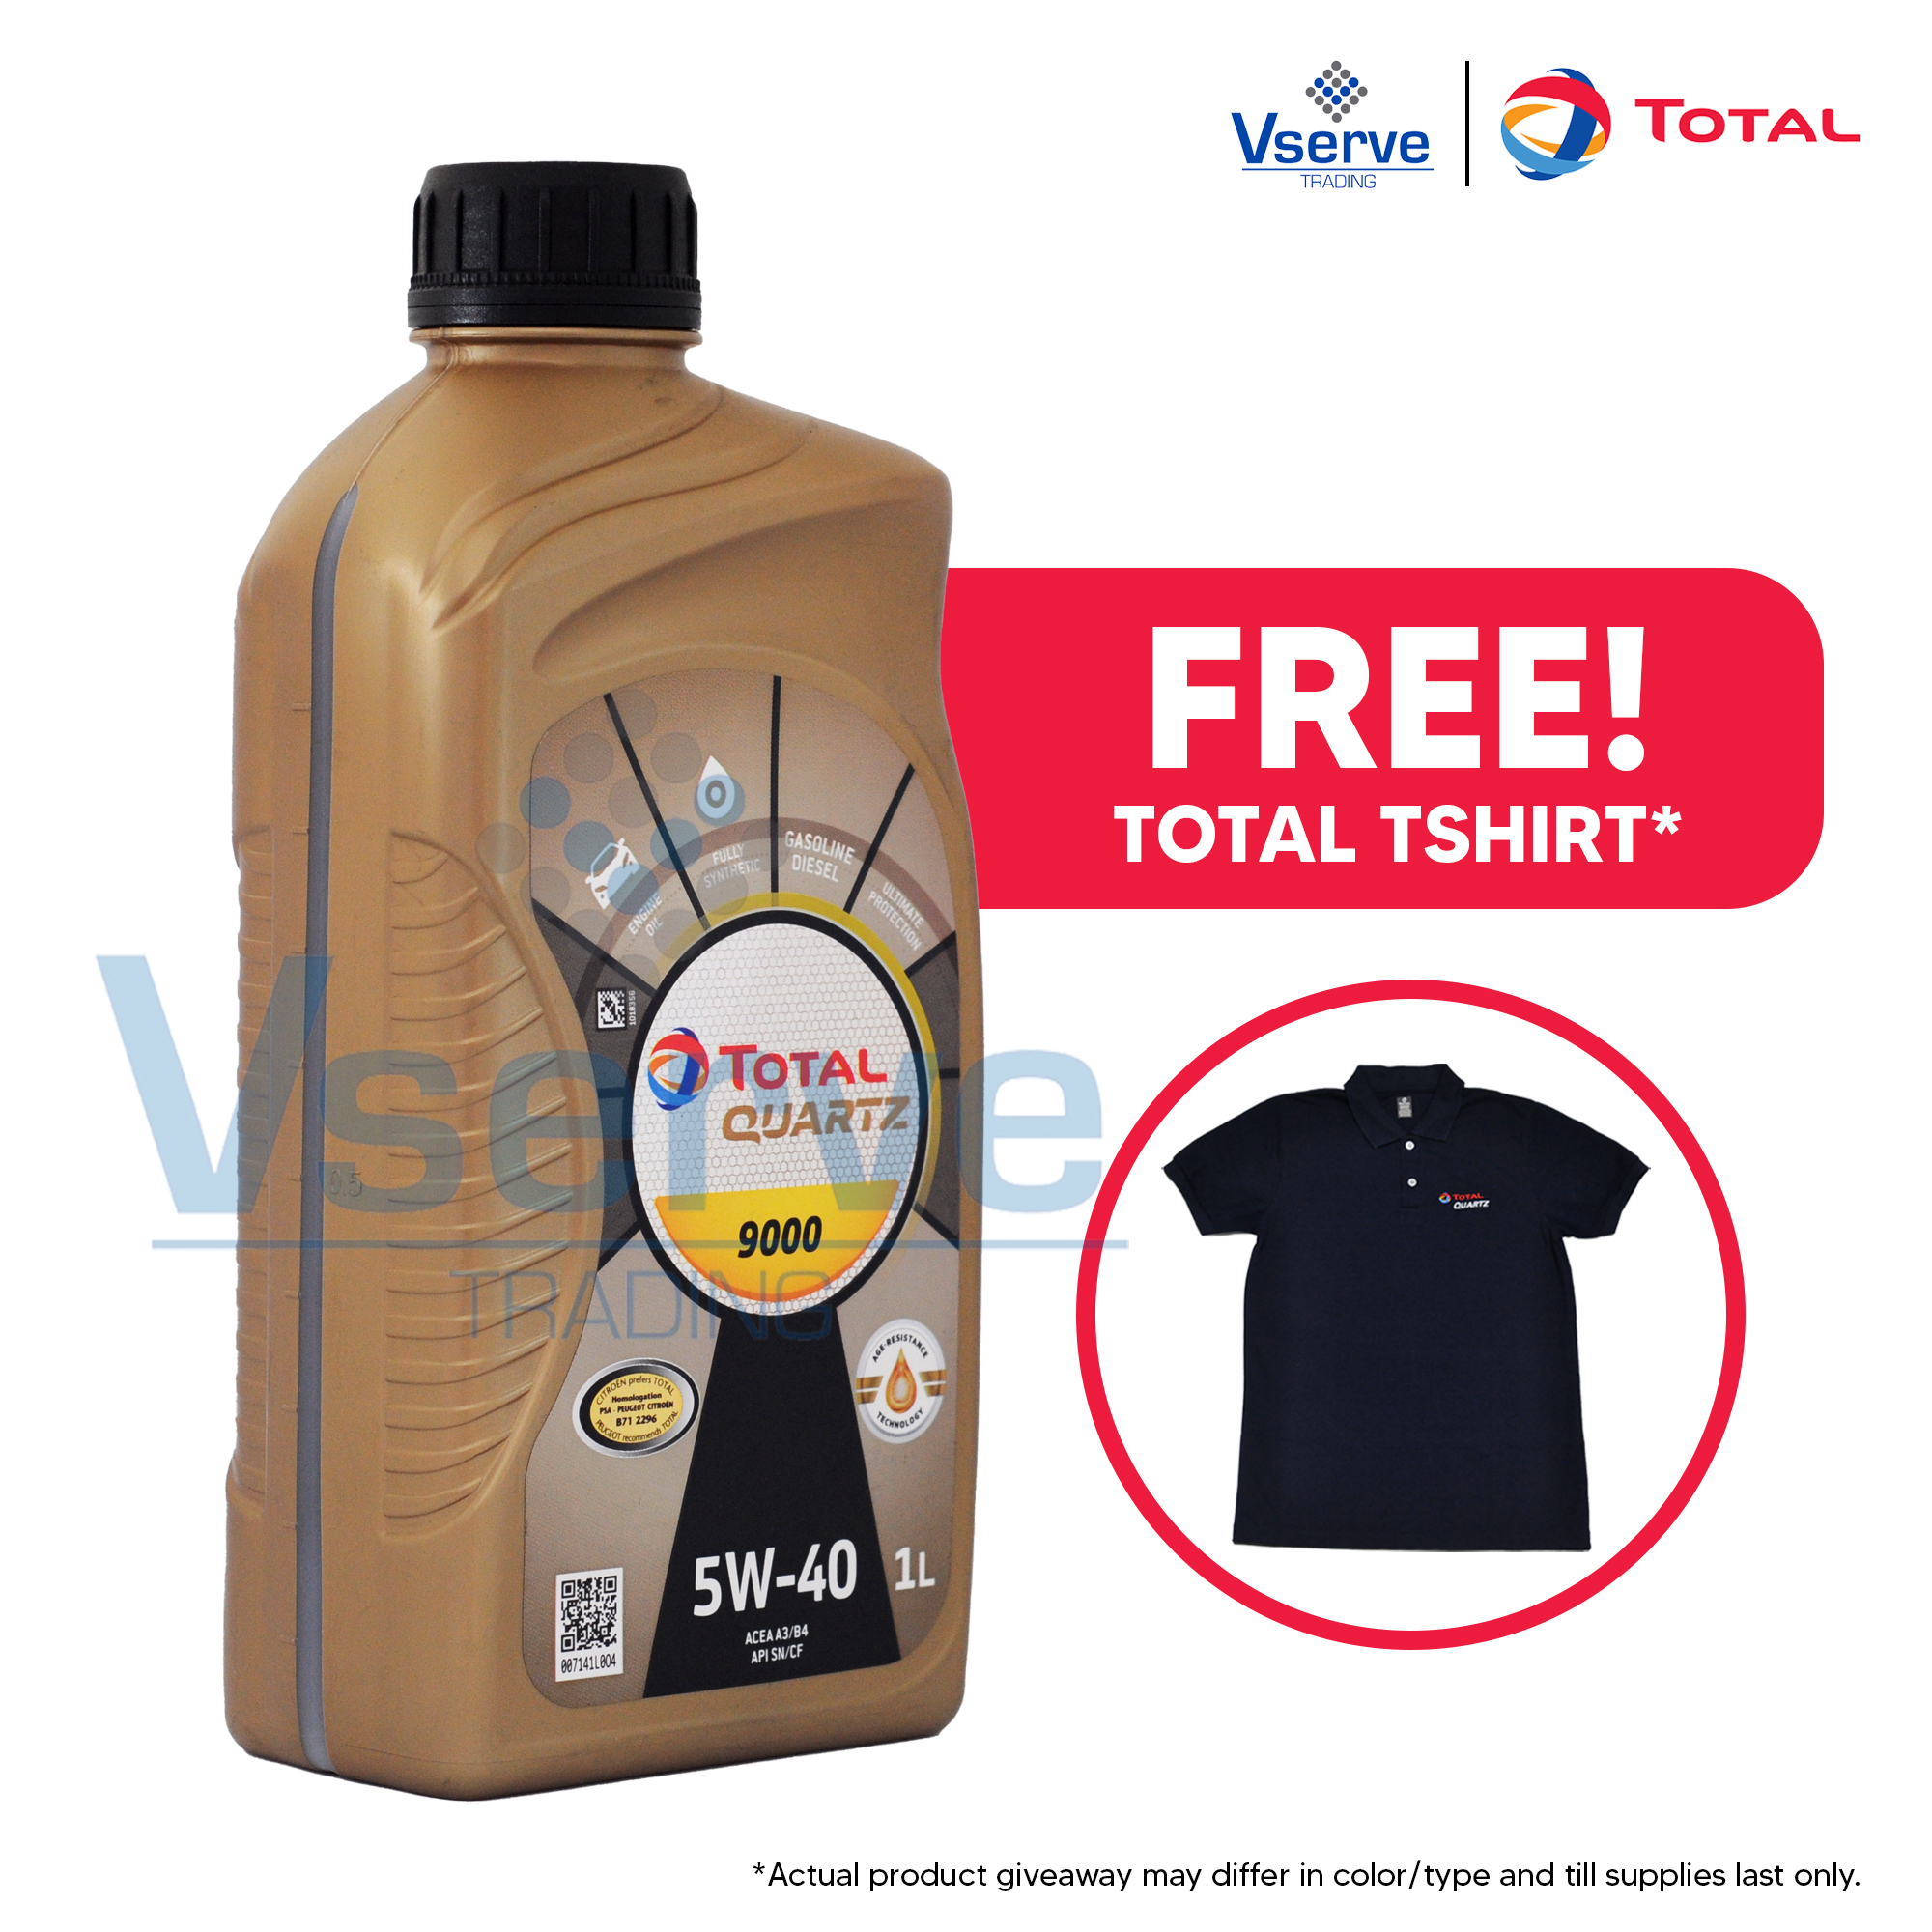 TOTAL 5w40 QUARTZ ENERGY 9000 High Performance Synthetic Engine Oil